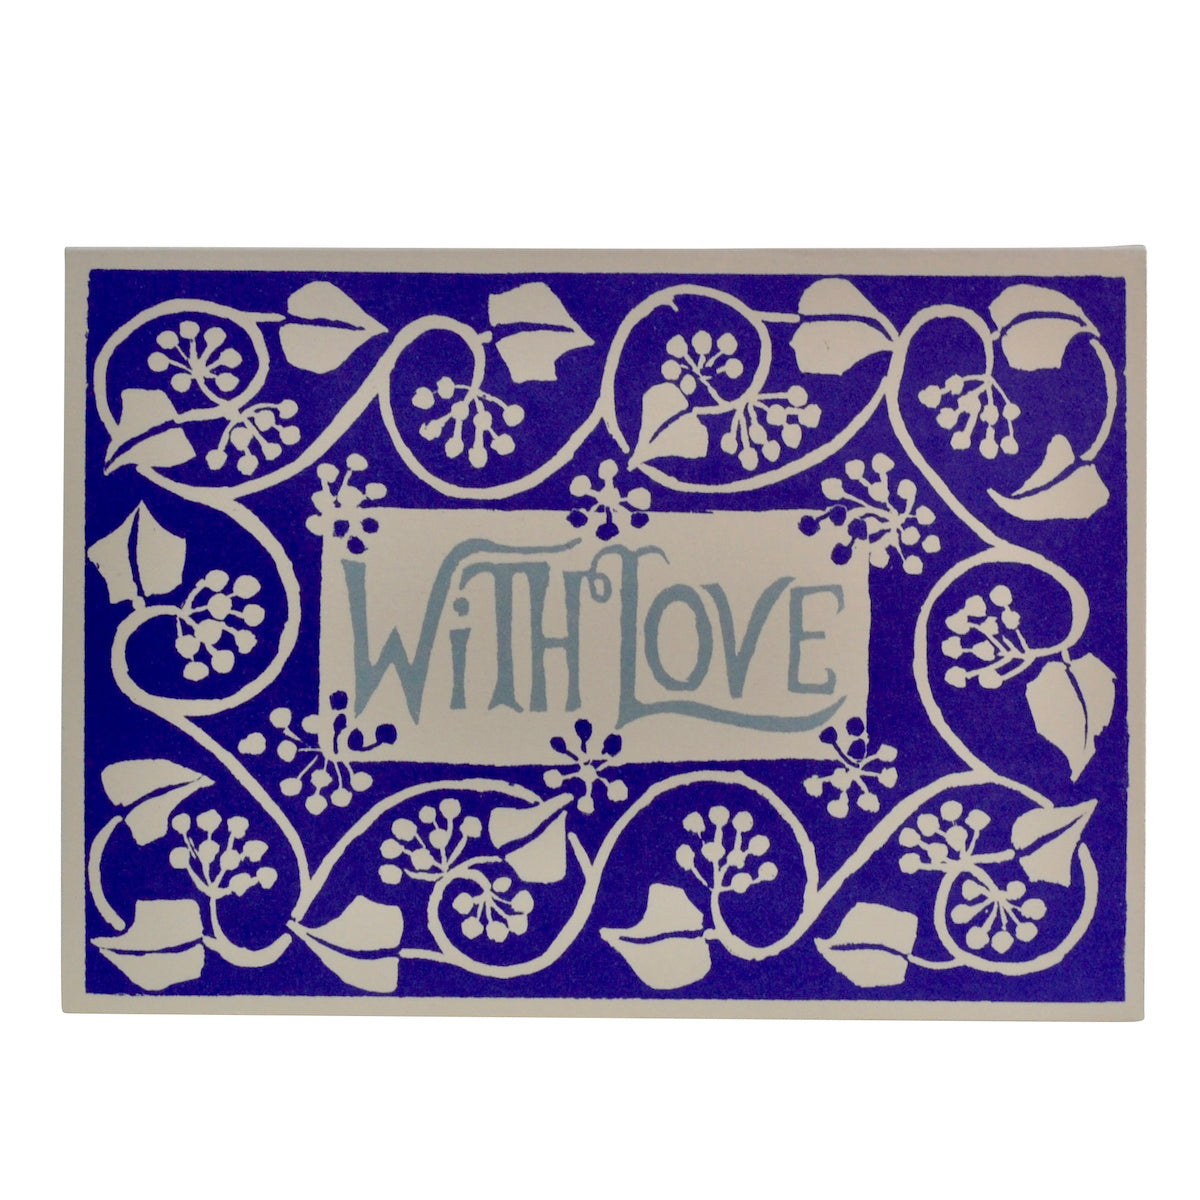 With Love Ivy Greetings Card